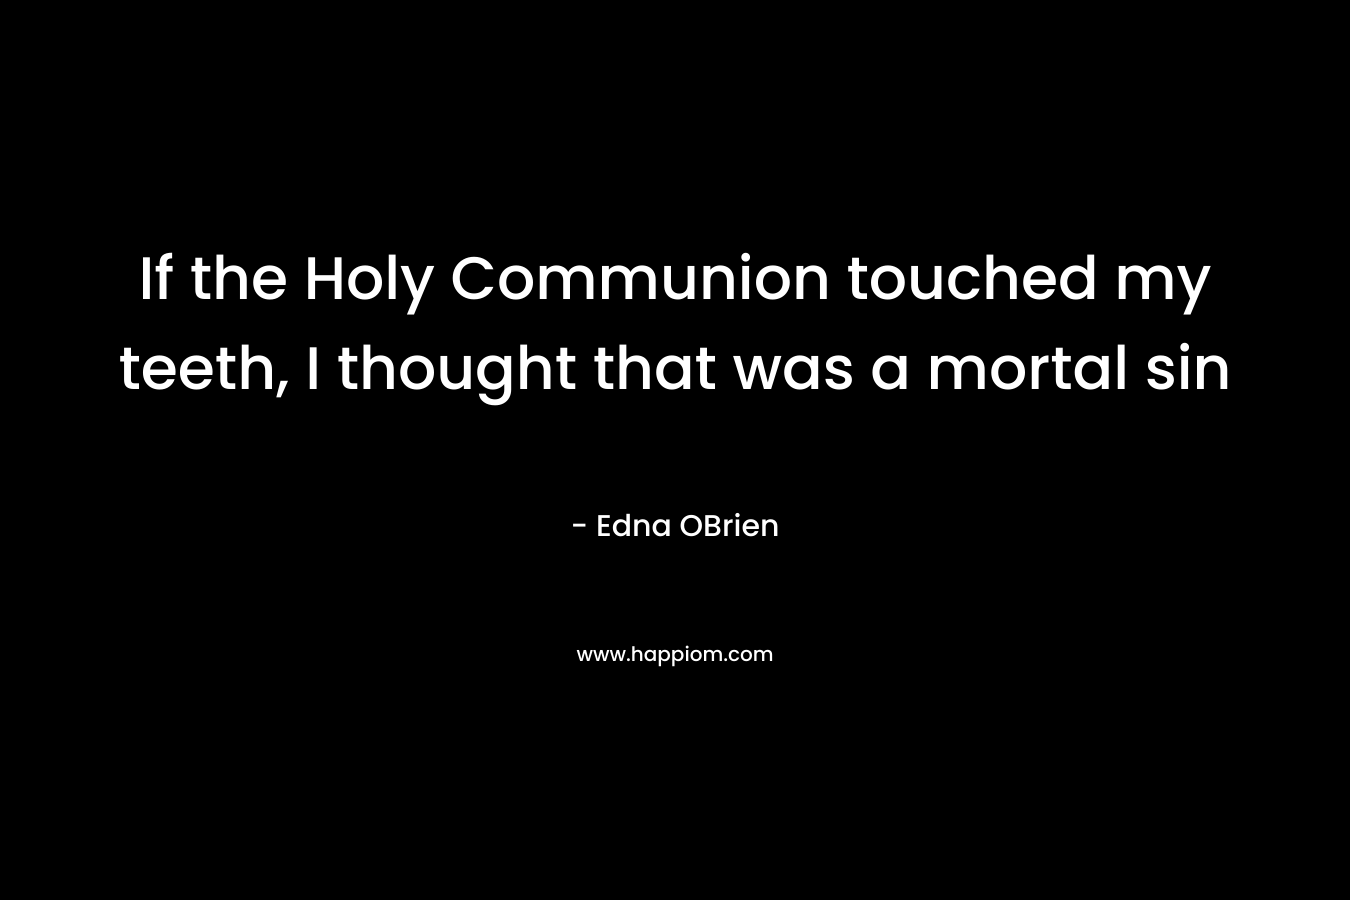 If the Holy Communion touched my teeth, I thought that was a mortal sin